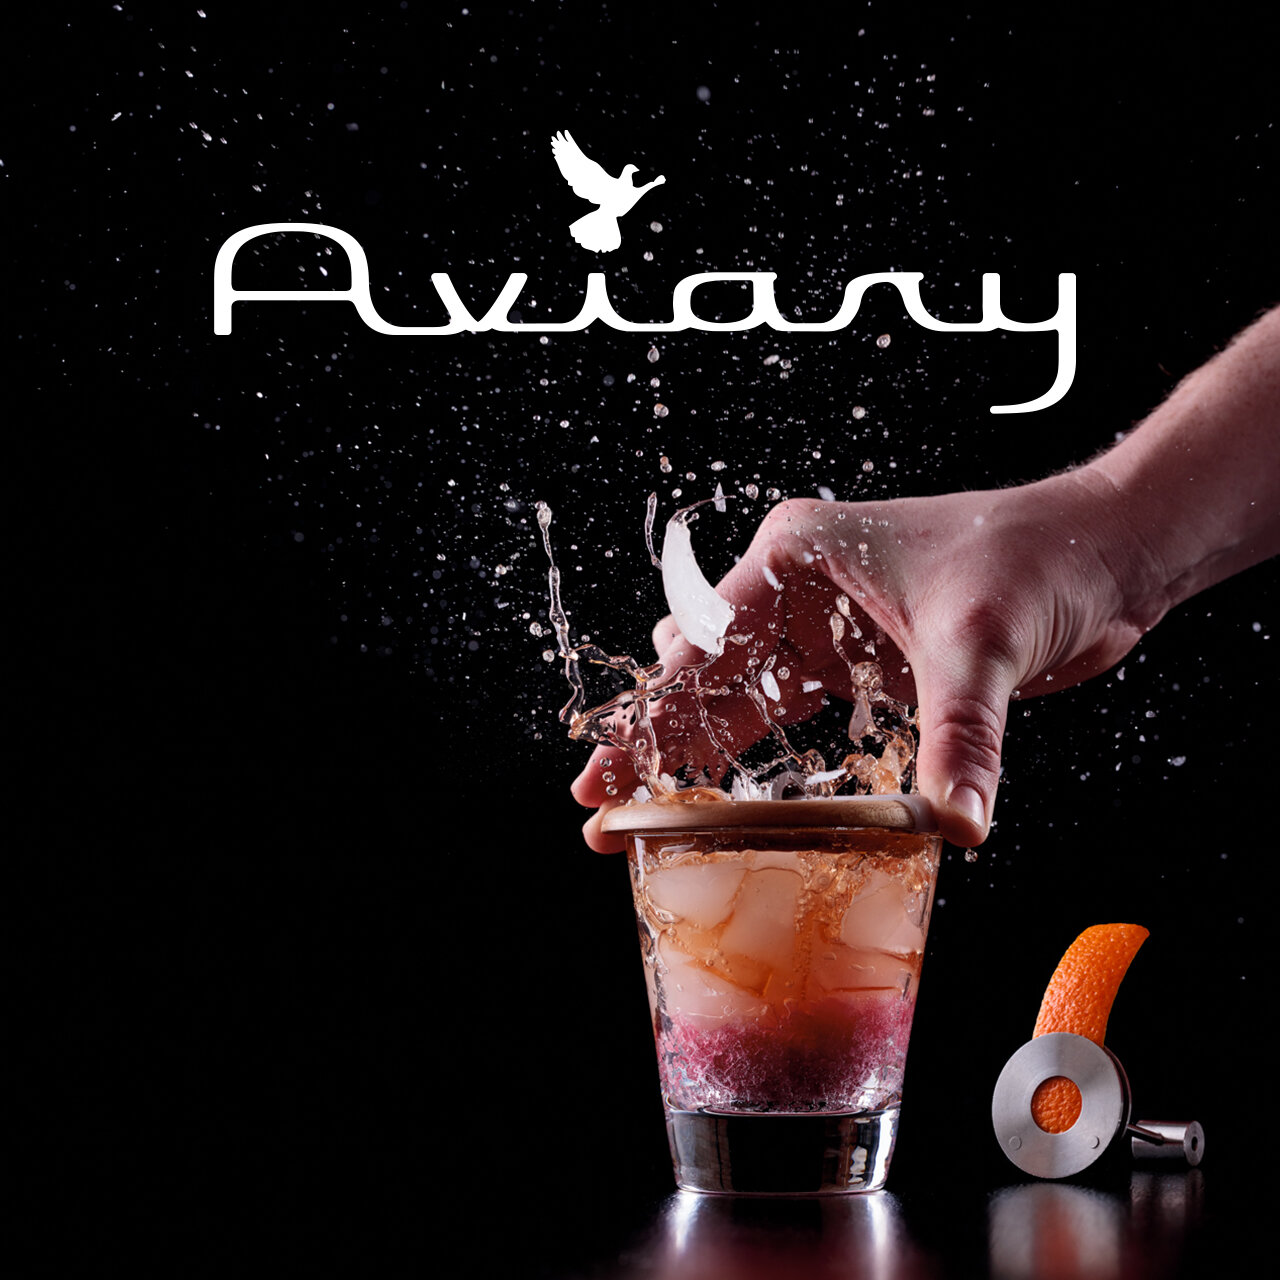 The Aviary Apron — The Alinea Group Store